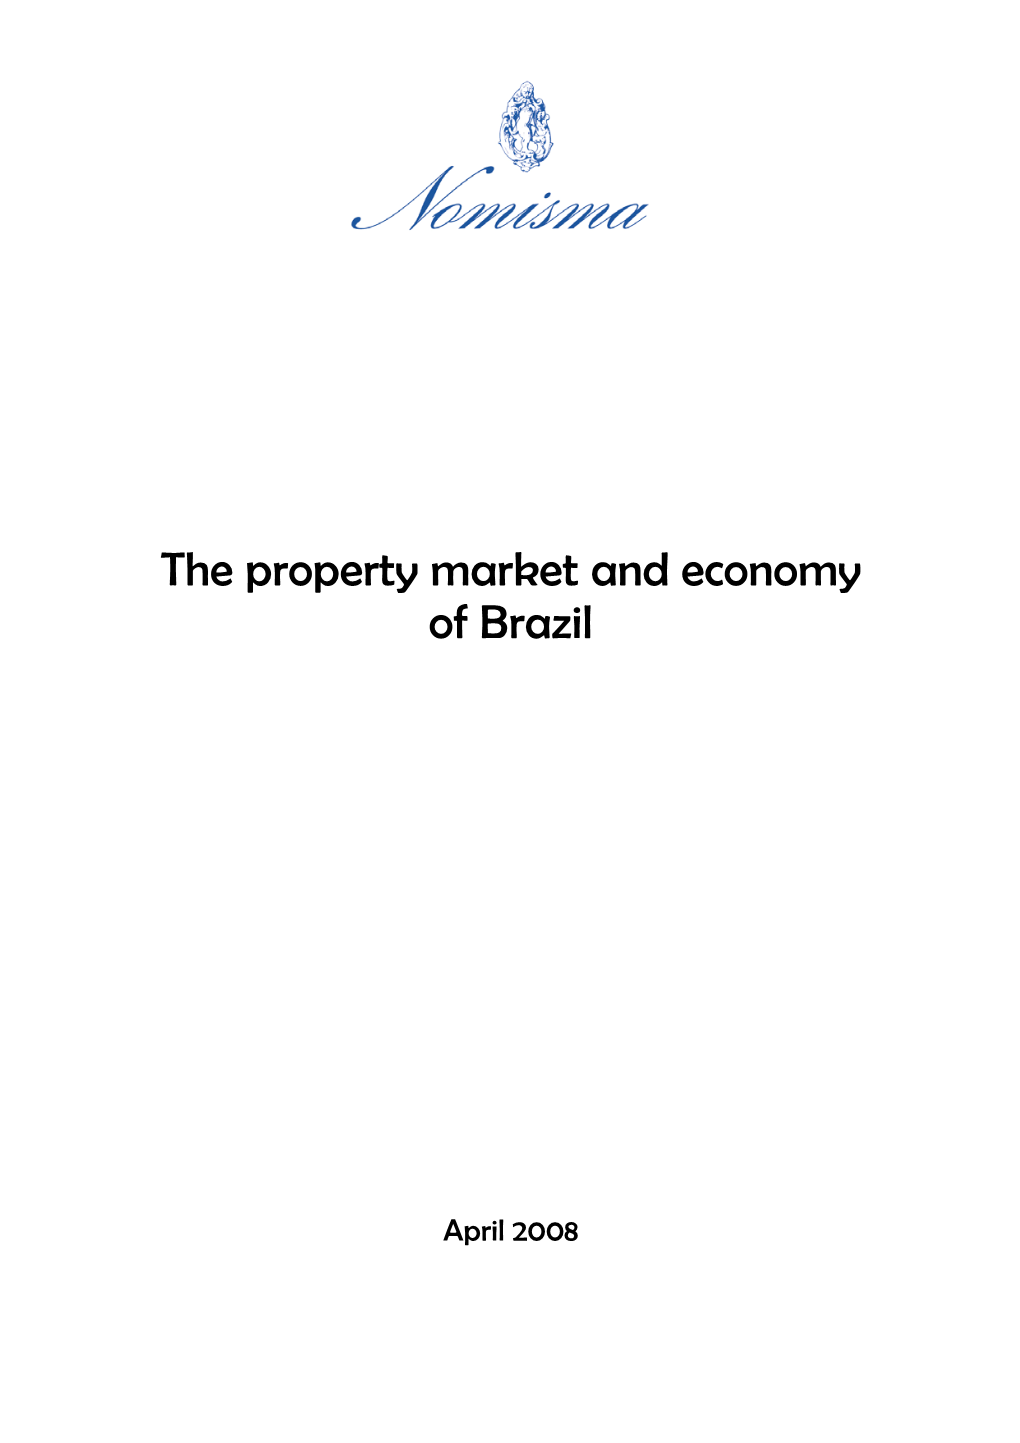 The Property Market and Economy of Brazil